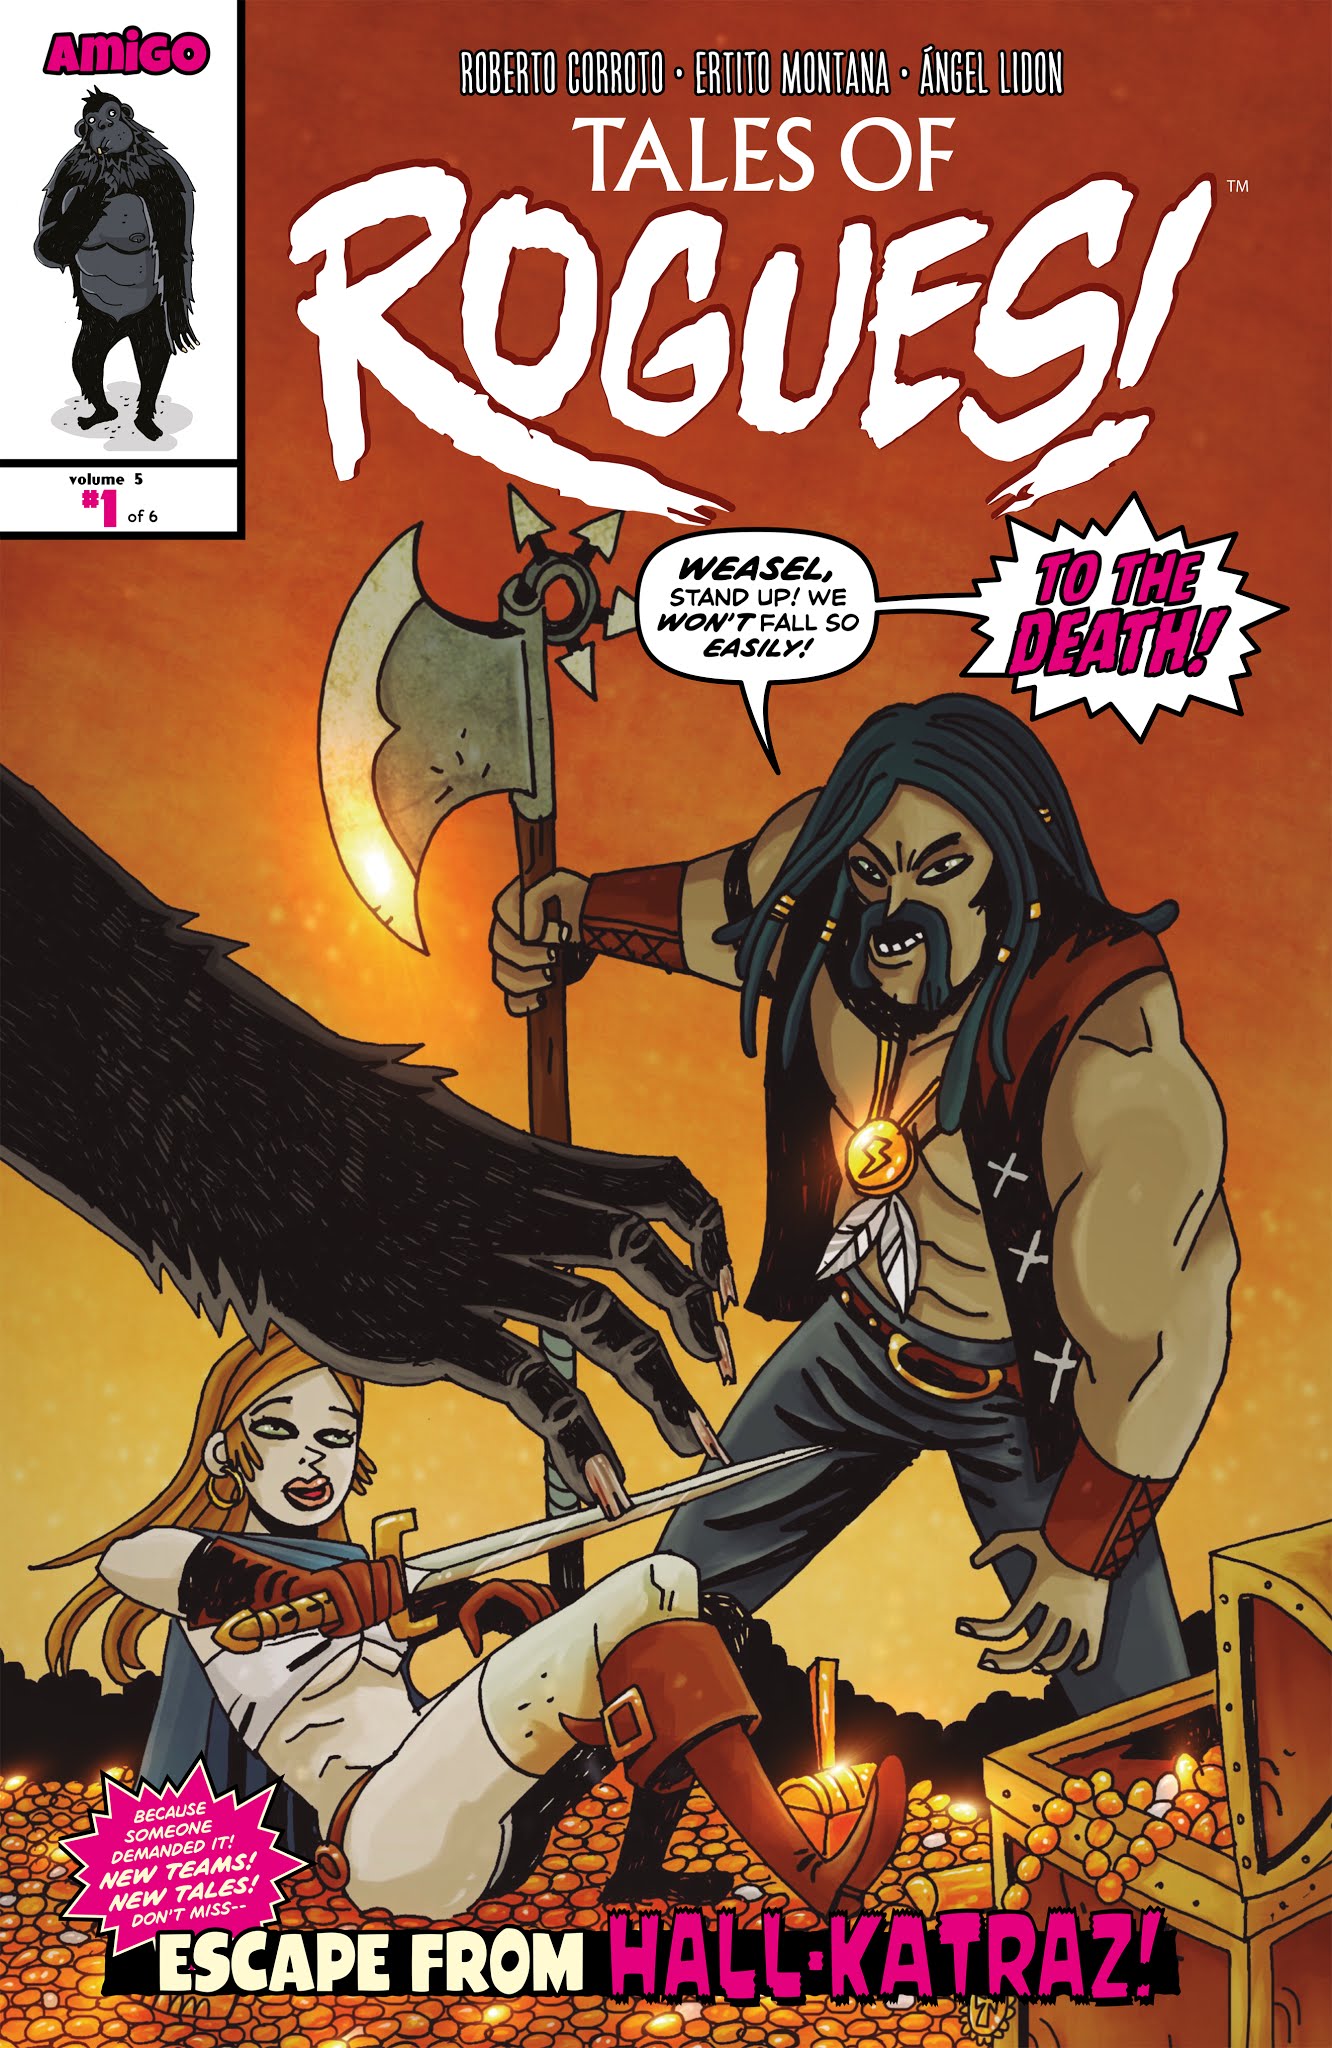 Read online Tales of Rogues! comic -  Issue #1 - 1